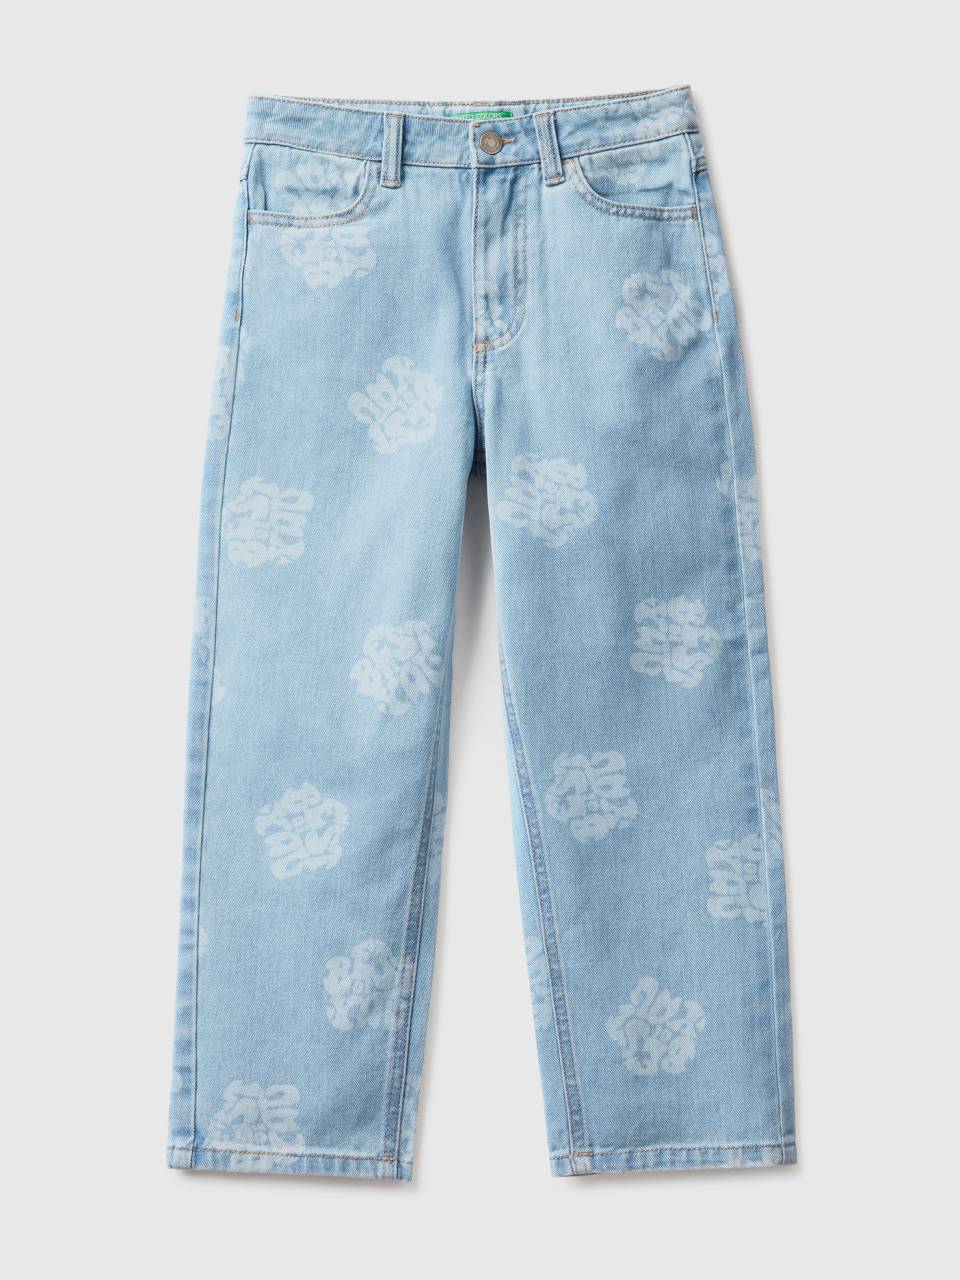 Benetton printed straight fit jeans. 1